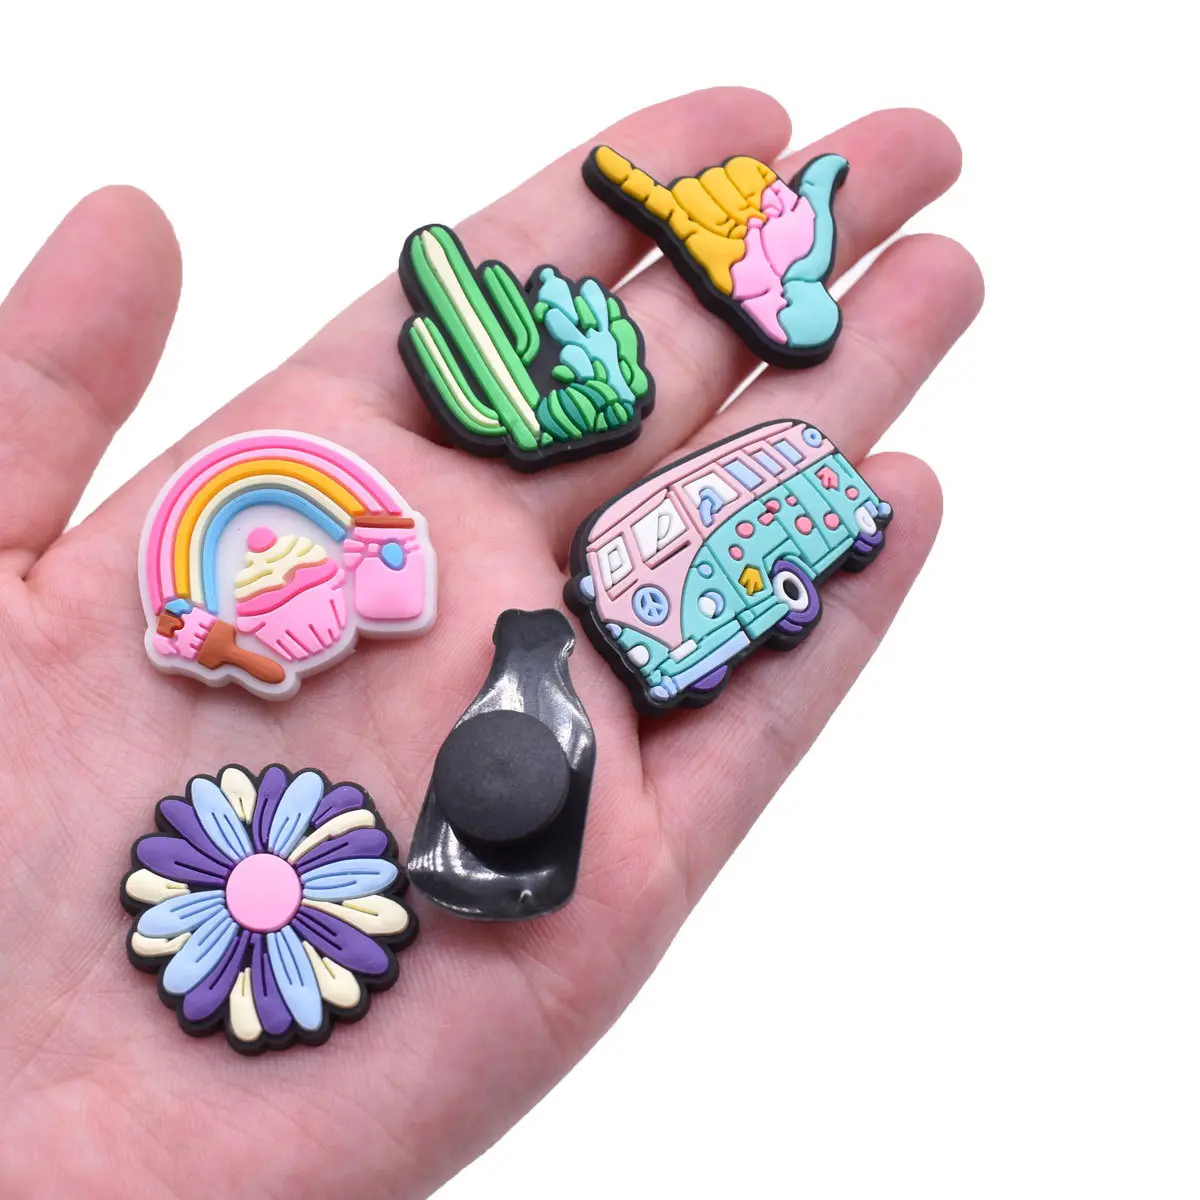 New Arrival Factory Wholesale Stock Clog Charms Summer View Beach Hawaii PVC Rubber Custom Shoe Decoration Shoe Charms